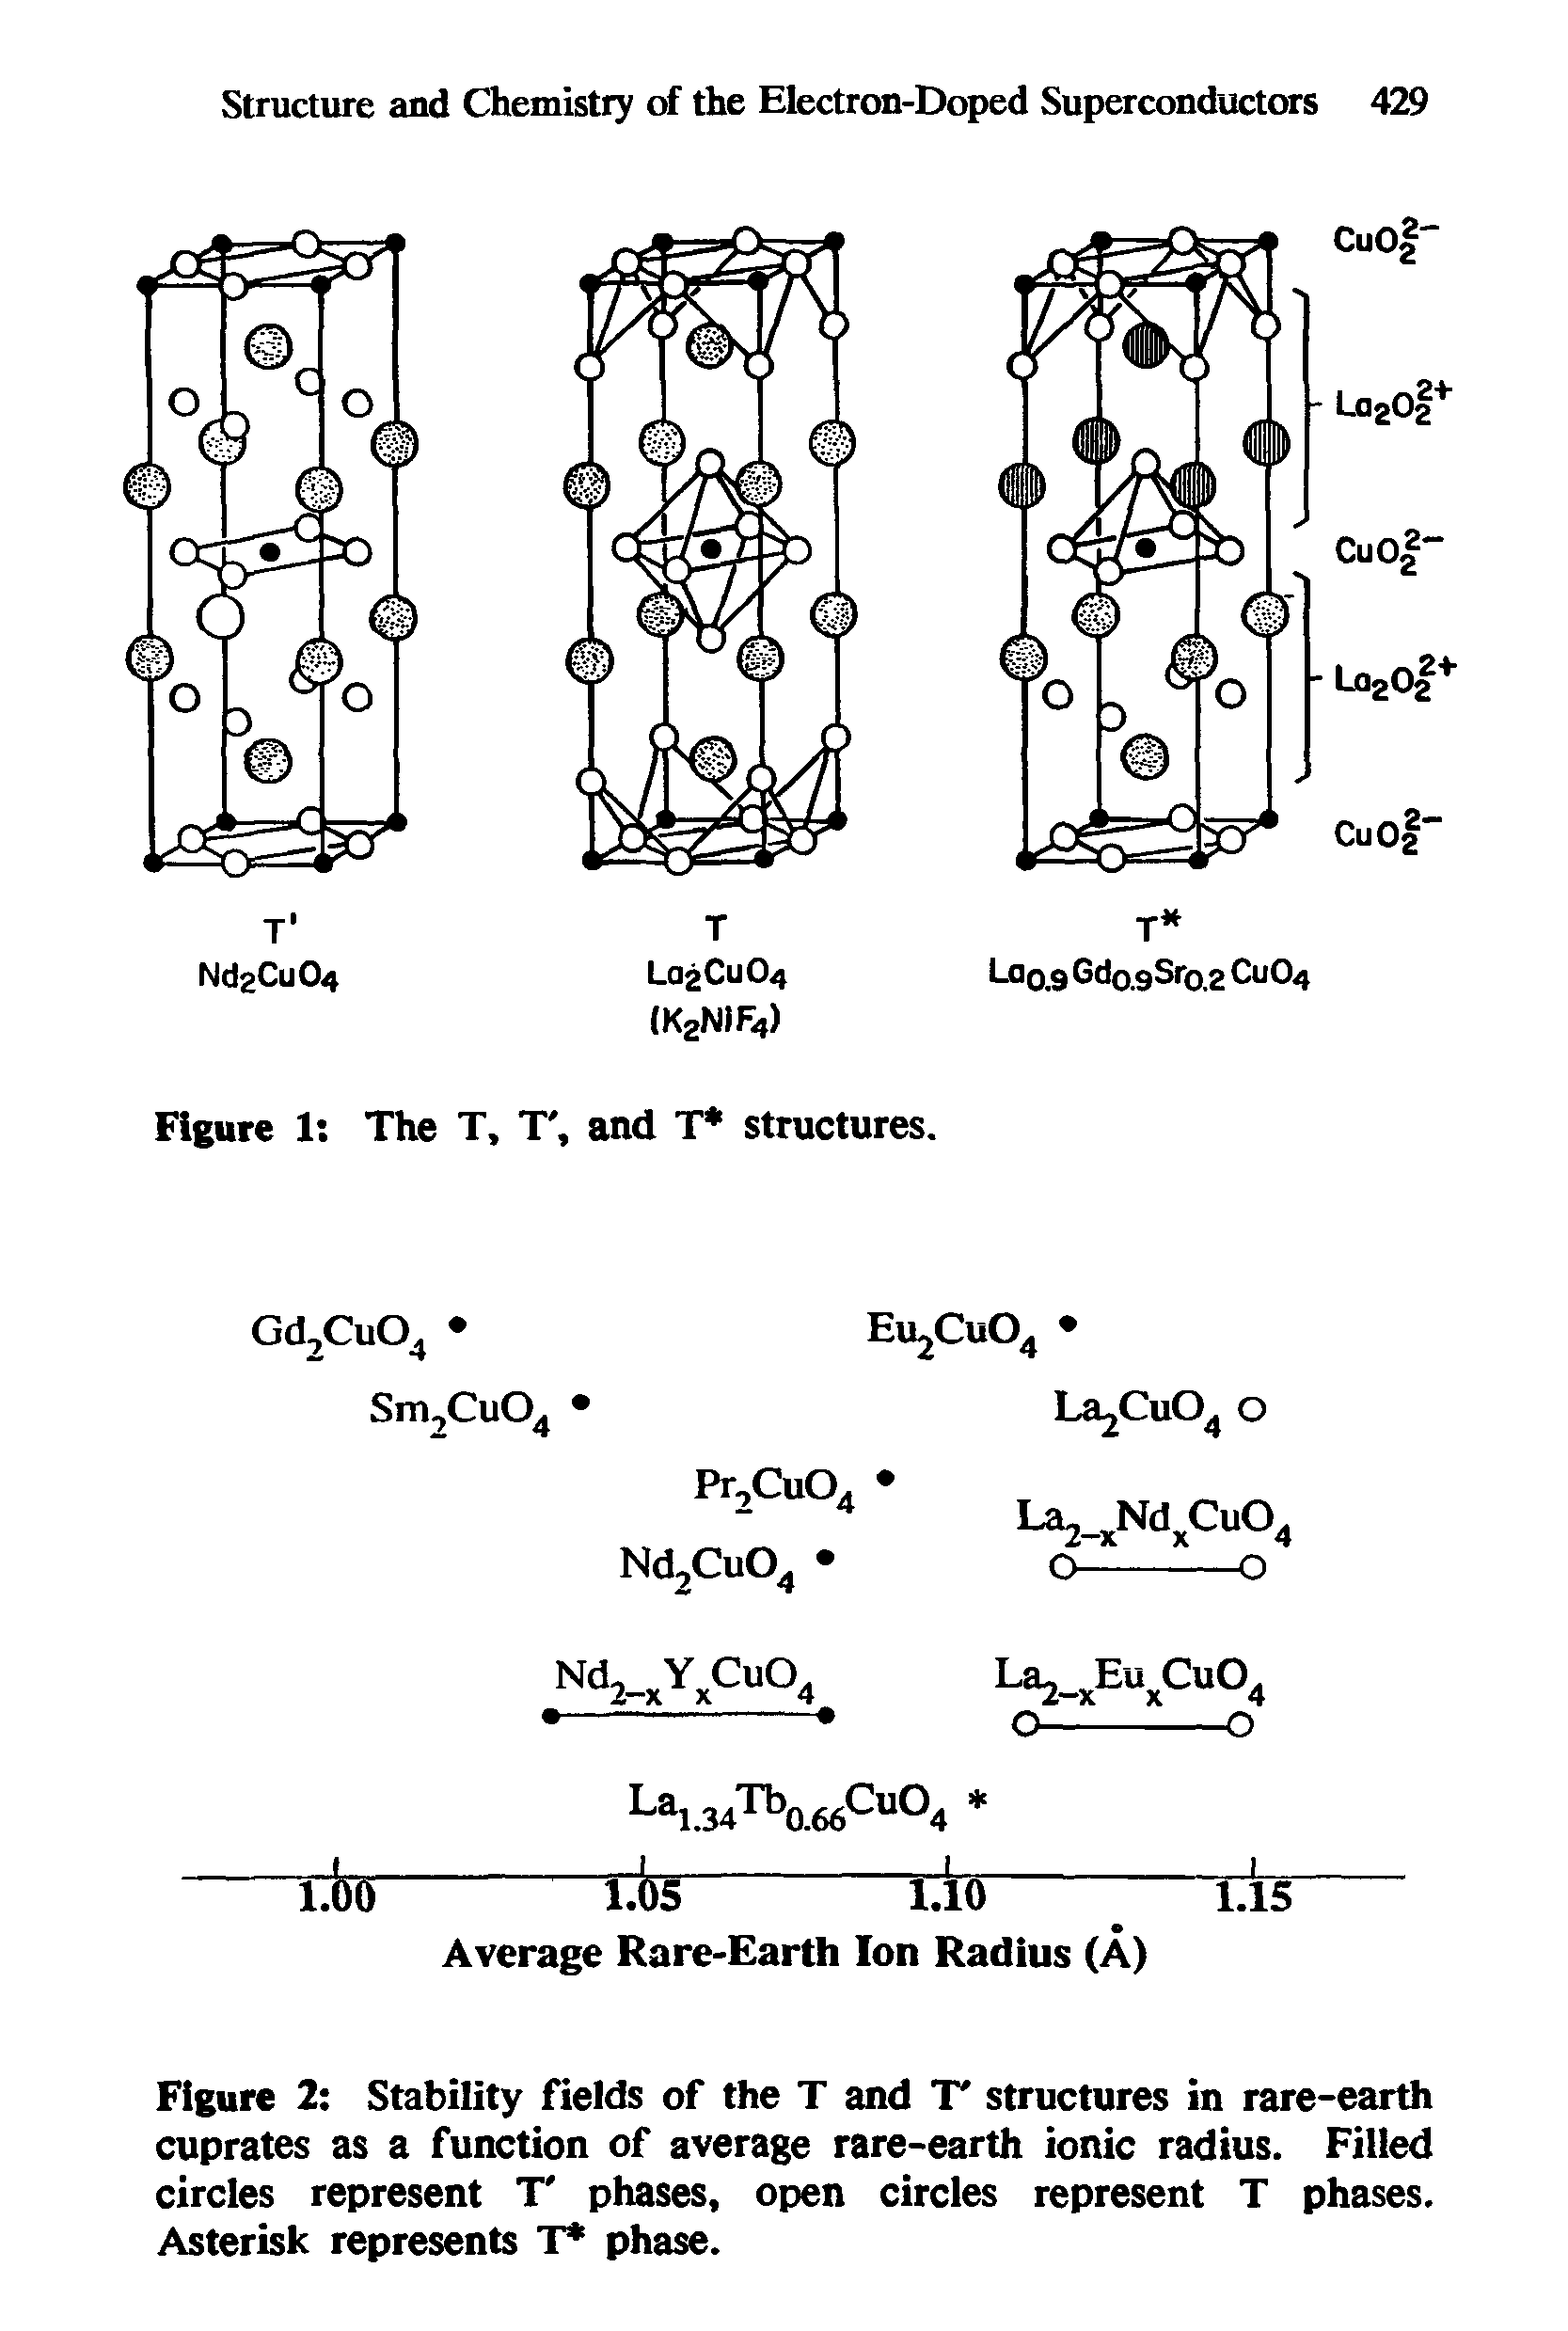 Figure 2 Stability fields of the T and T structures in rare-earth cuprates as a function of average rare-earth ionic radius. Filled circles represent T phases, open circles represent T phases. Asterisk represents T phase.